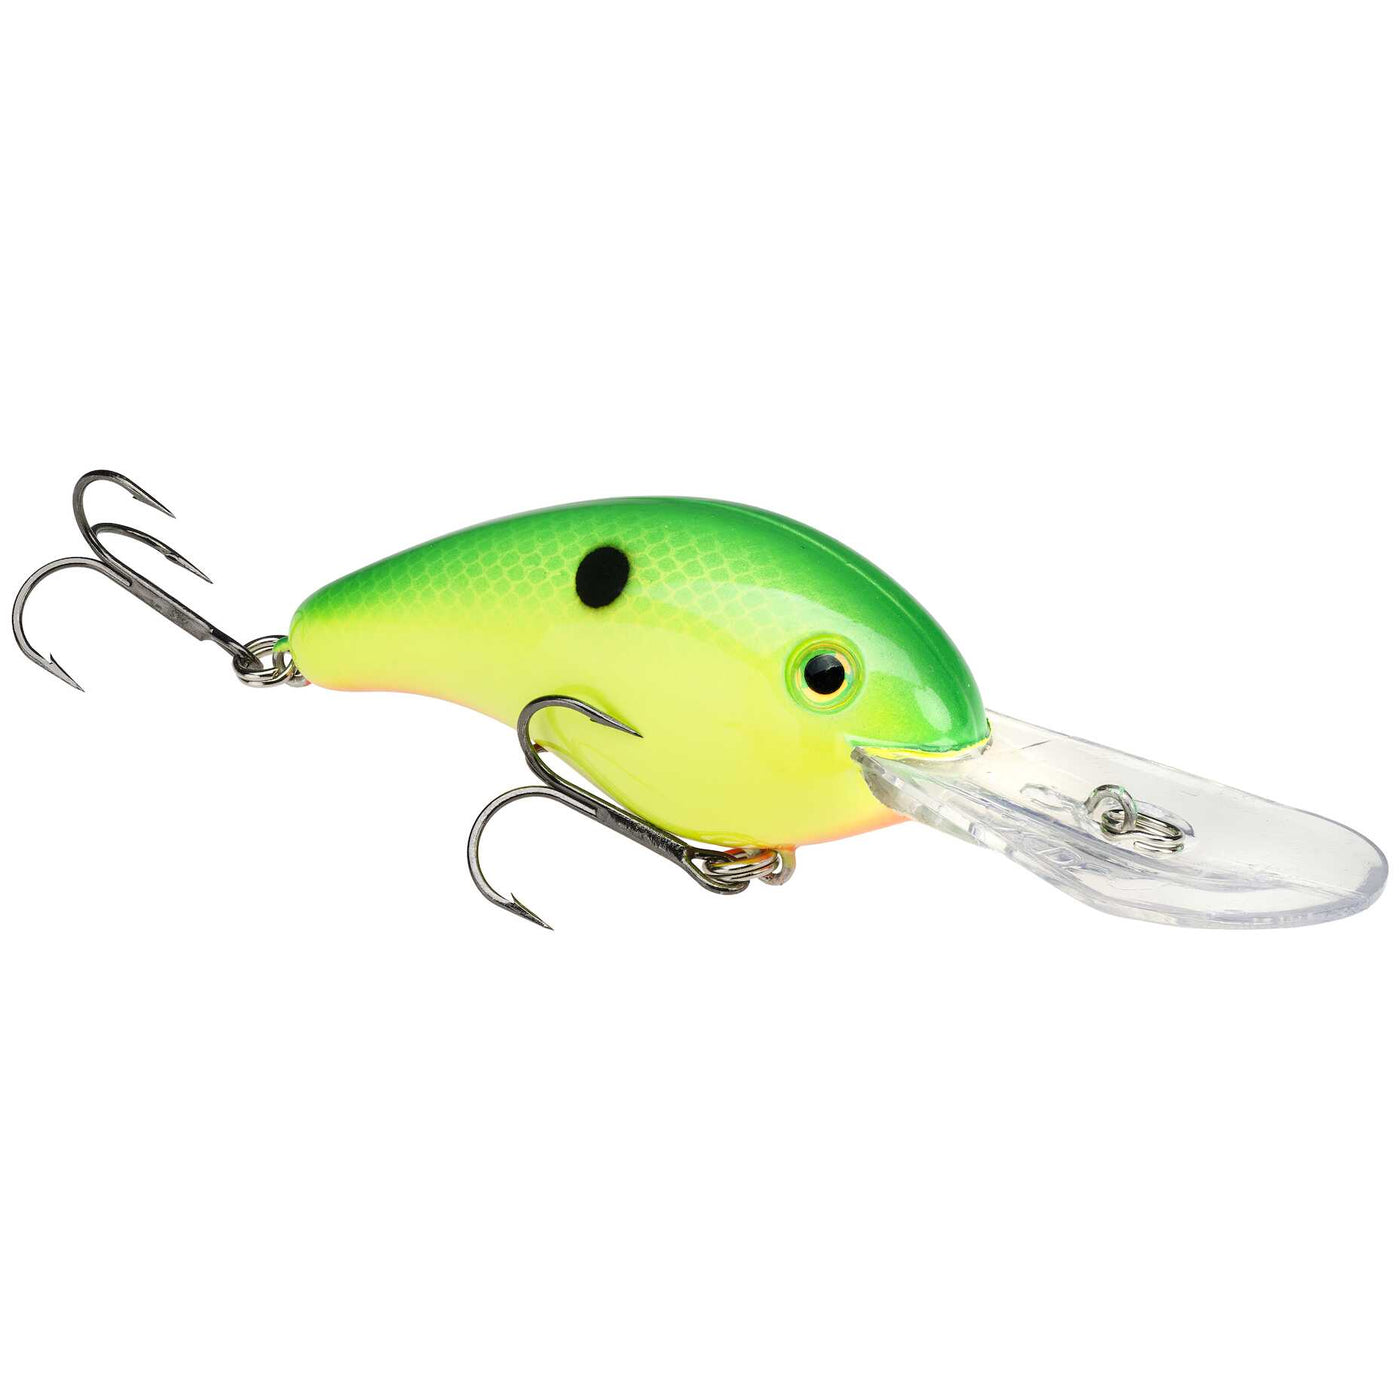 Strike King - Pro Model 5XD Crankbait Lure Strike King Lure Company Chartreuse with Green Back 